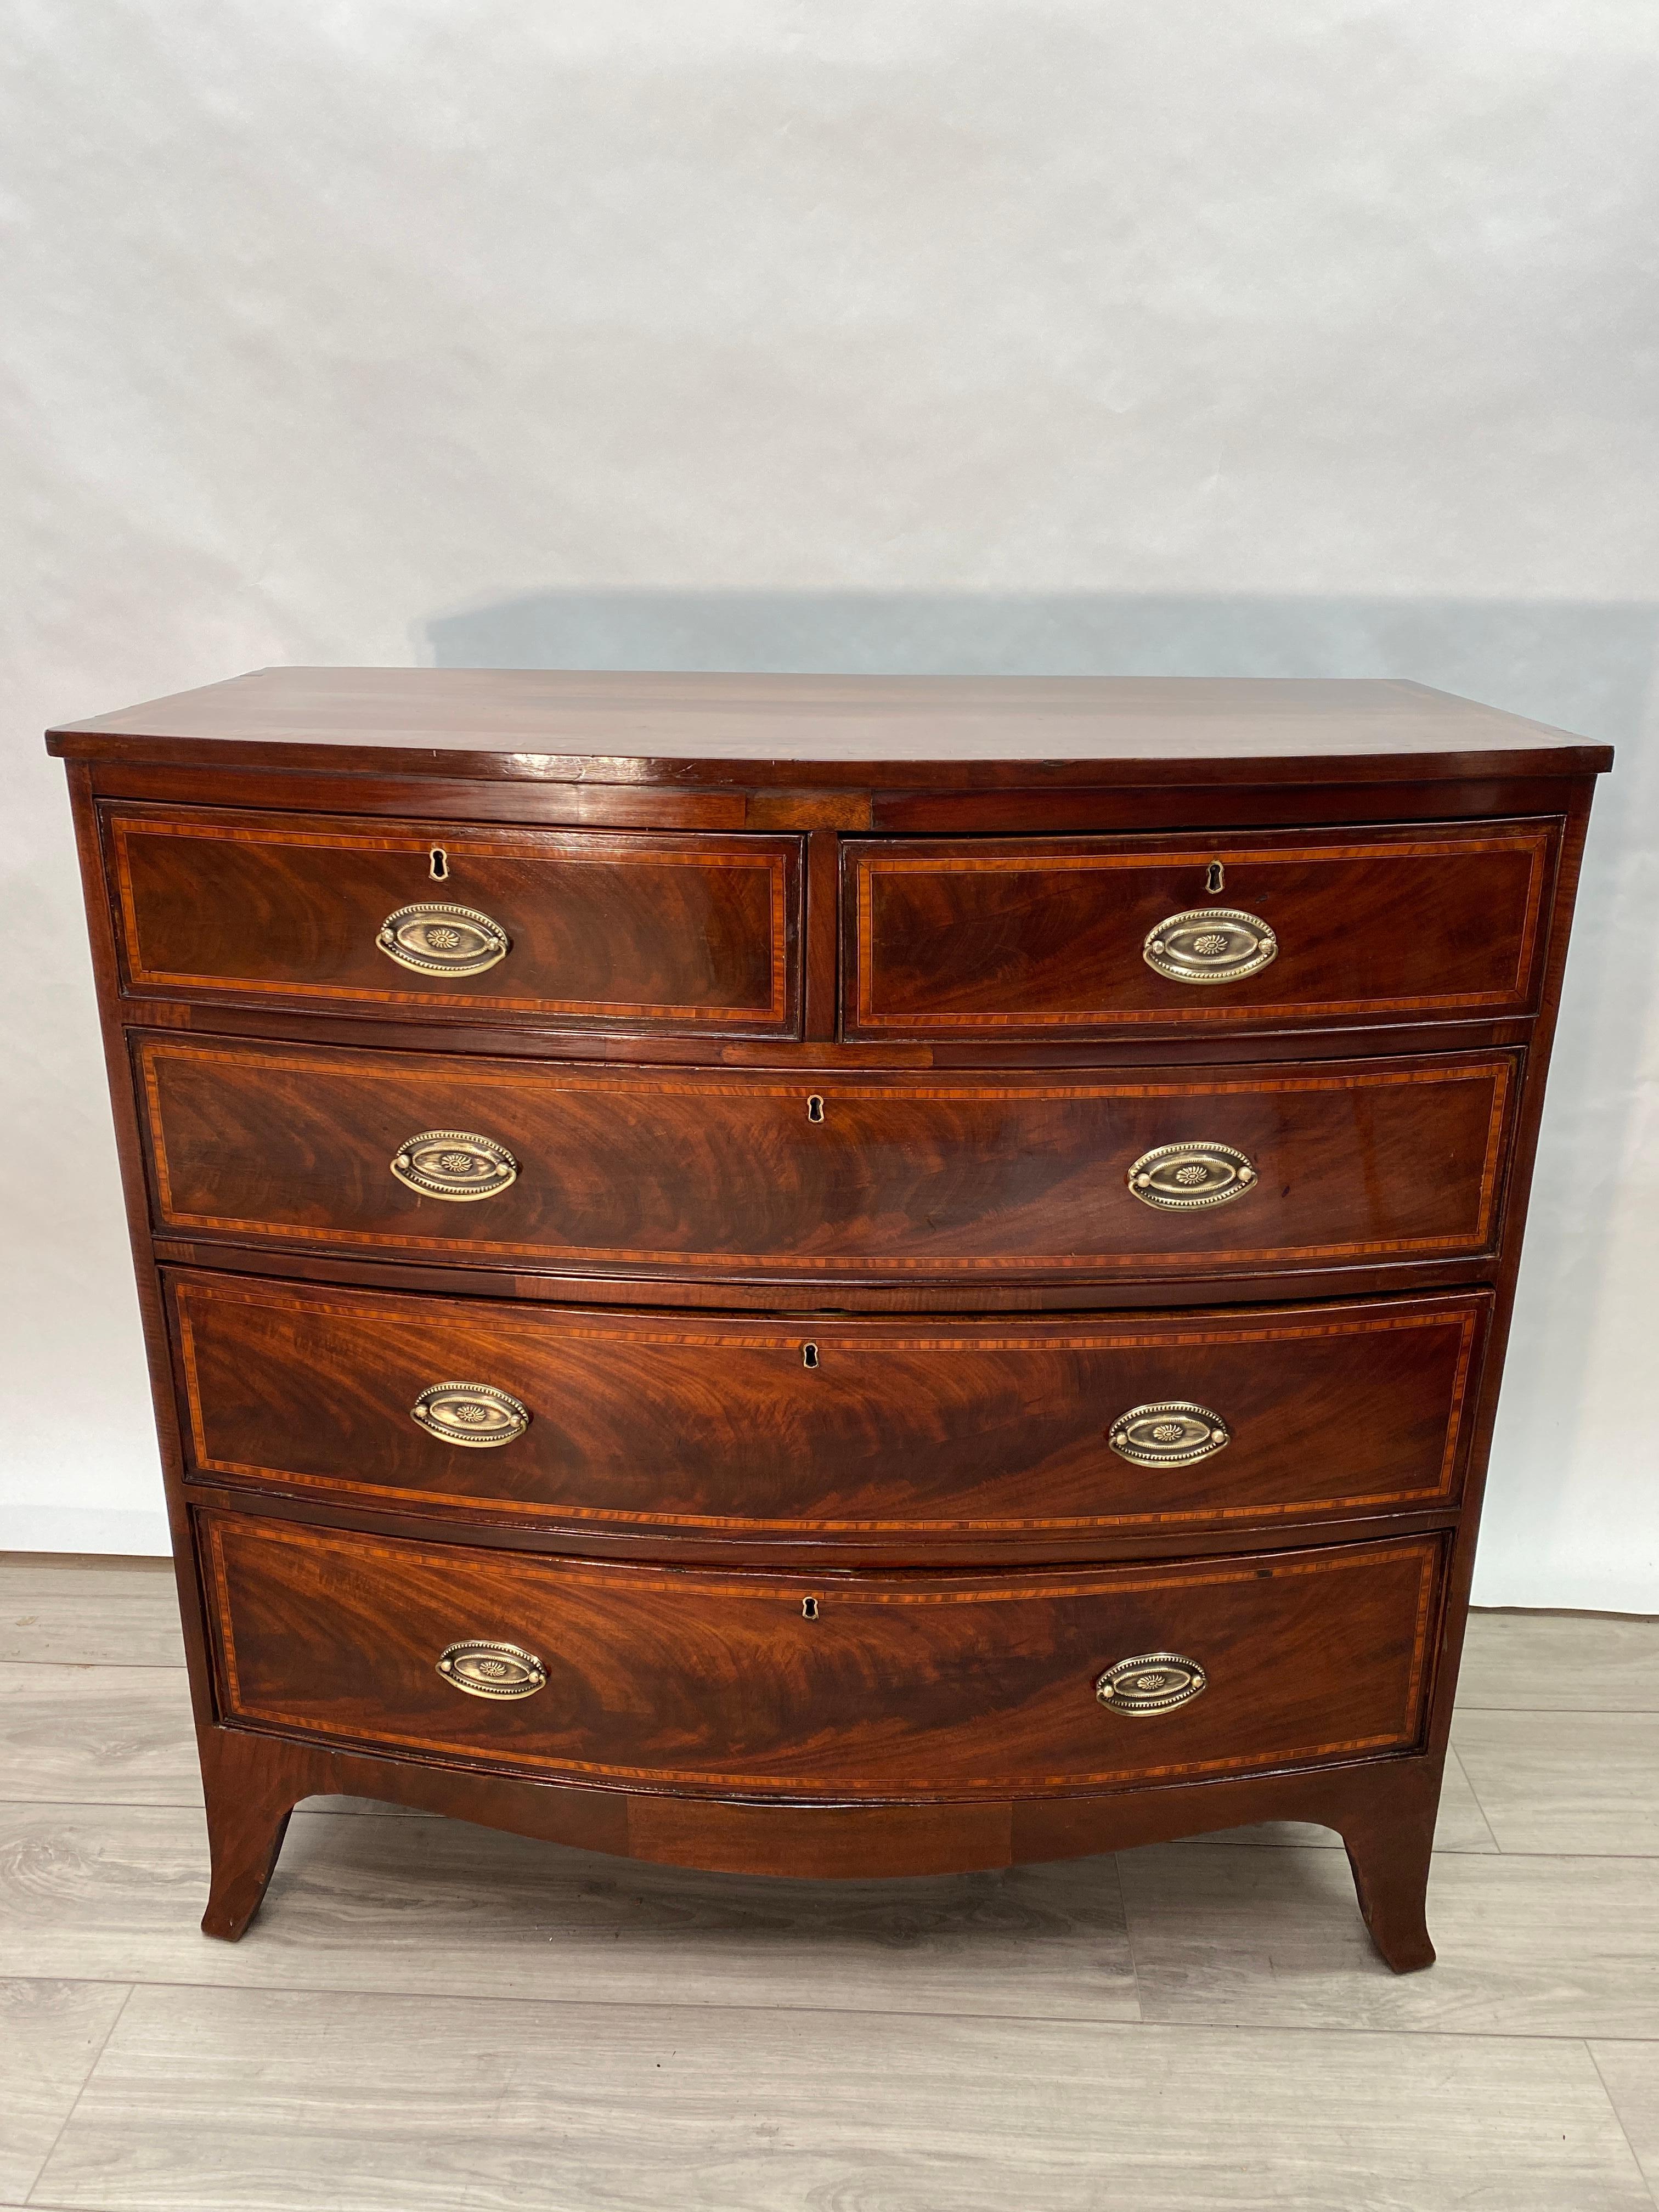 Handsome American made 19th century English Hepplewhite Bow Front chest of drawers. Two over three drawers with bail style brass pulls. Banded veneer encompassing the top. The drawer fronts have been inlayed with flamed mahogany and string banding.